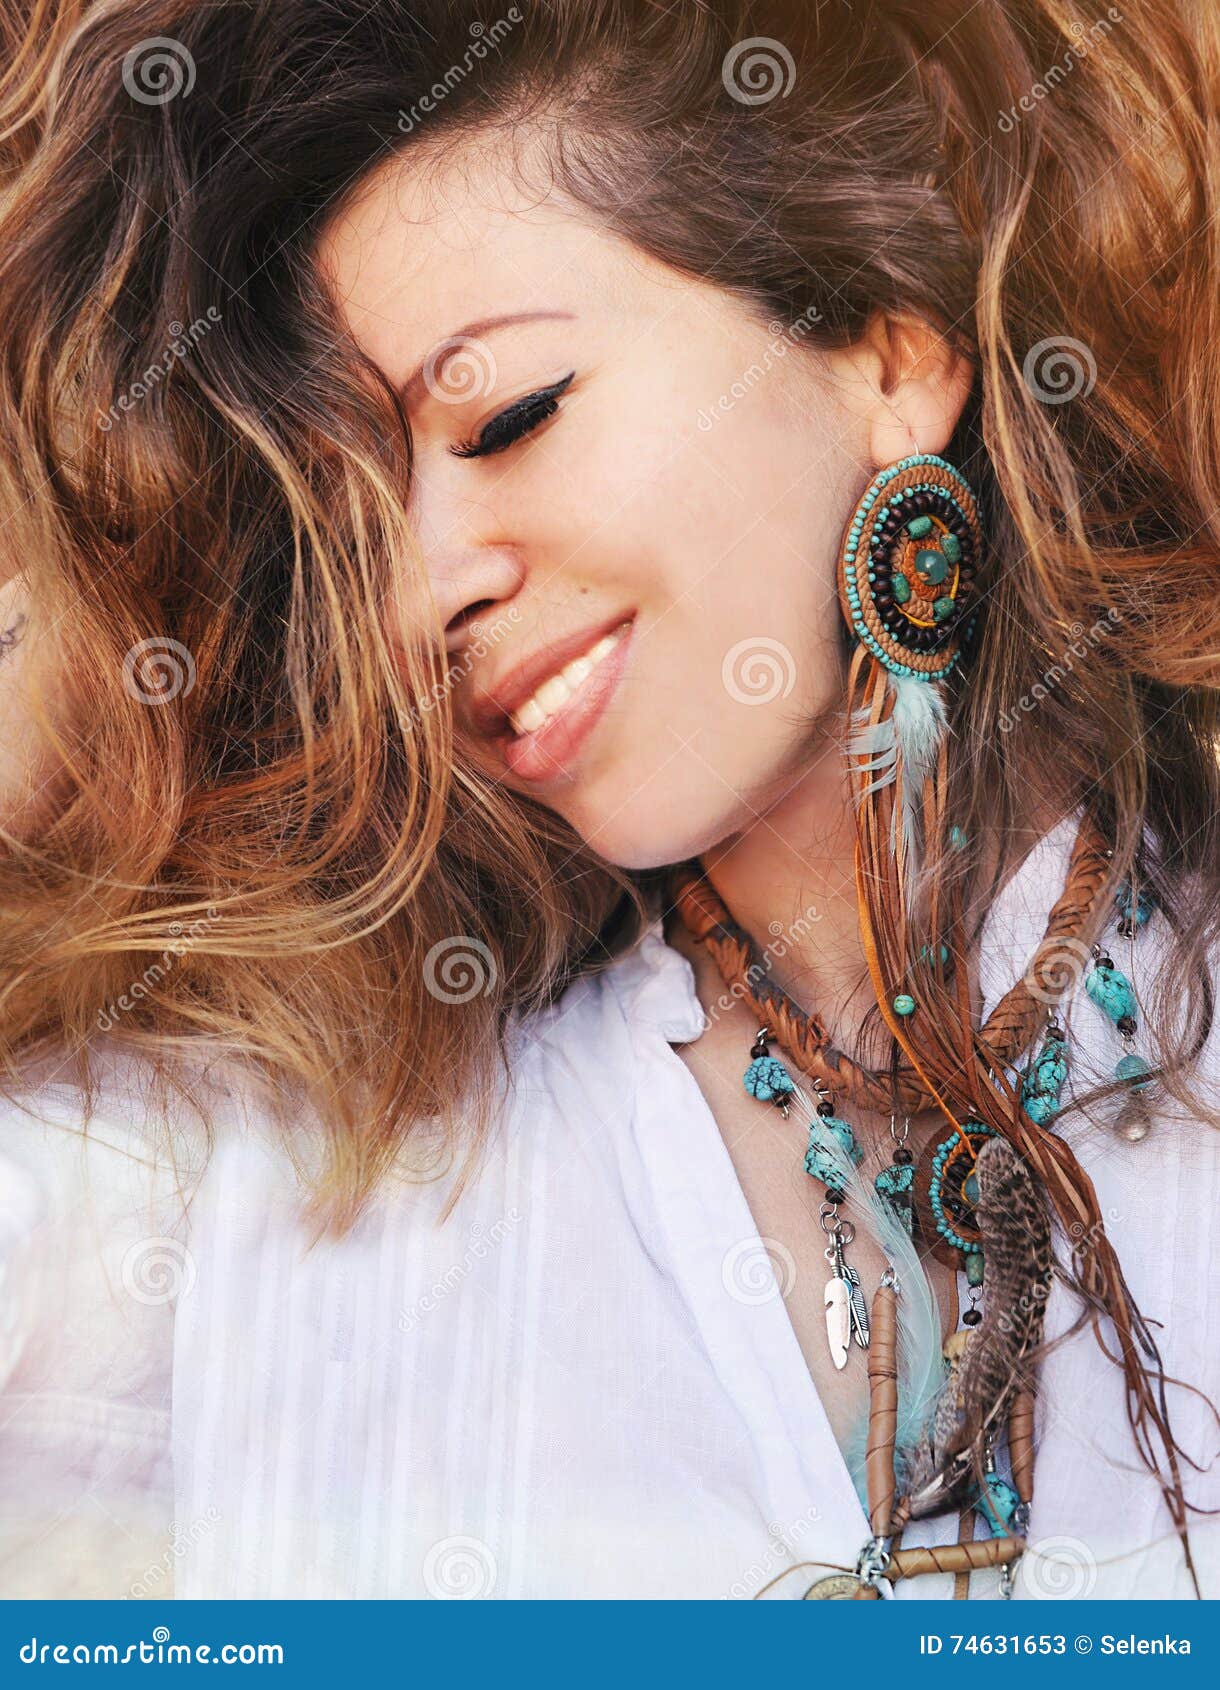 beauty close up fashion smiling woman portrait with handmade necklace and earrings made with beads, leather and feathers, boho chi